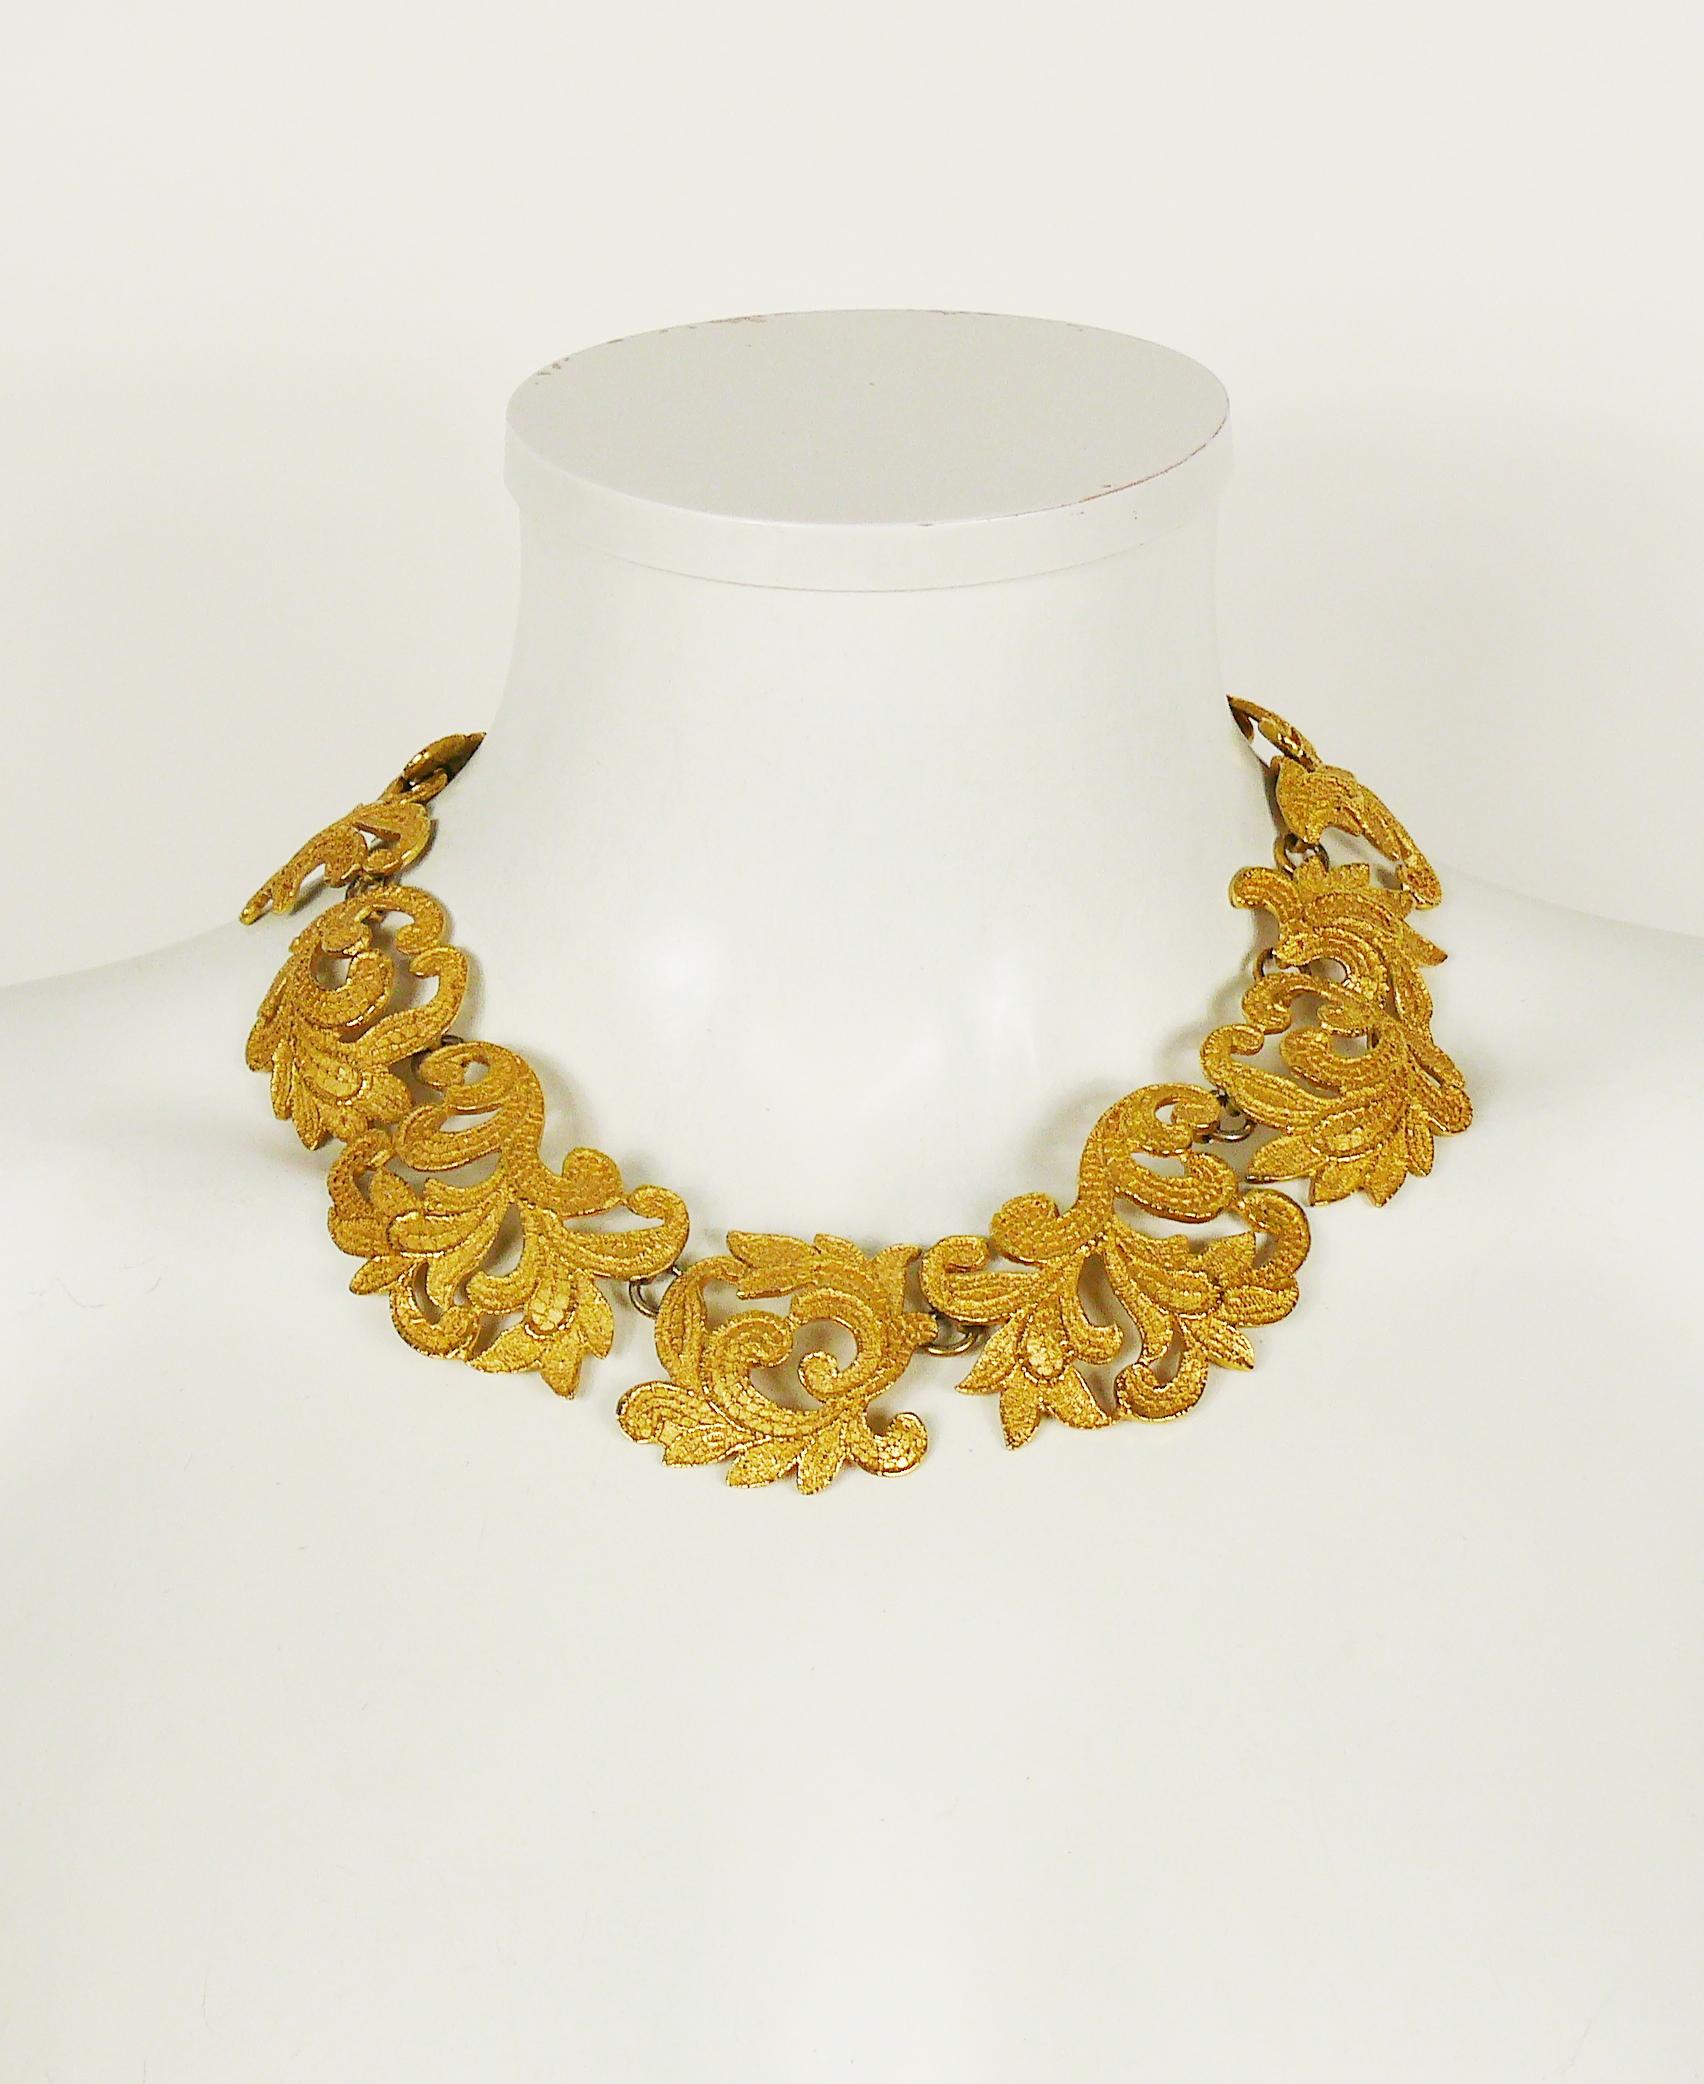 YVES SAINT LAURENT vintage gold toned textured lace leaf pattern links necklace.

Adjustable toggle closure.

Embossed YSL.
YVES SAINT LAURENT signatures on the loop closures. 
Made in France.

Indicative measurements : adjustable length from approx